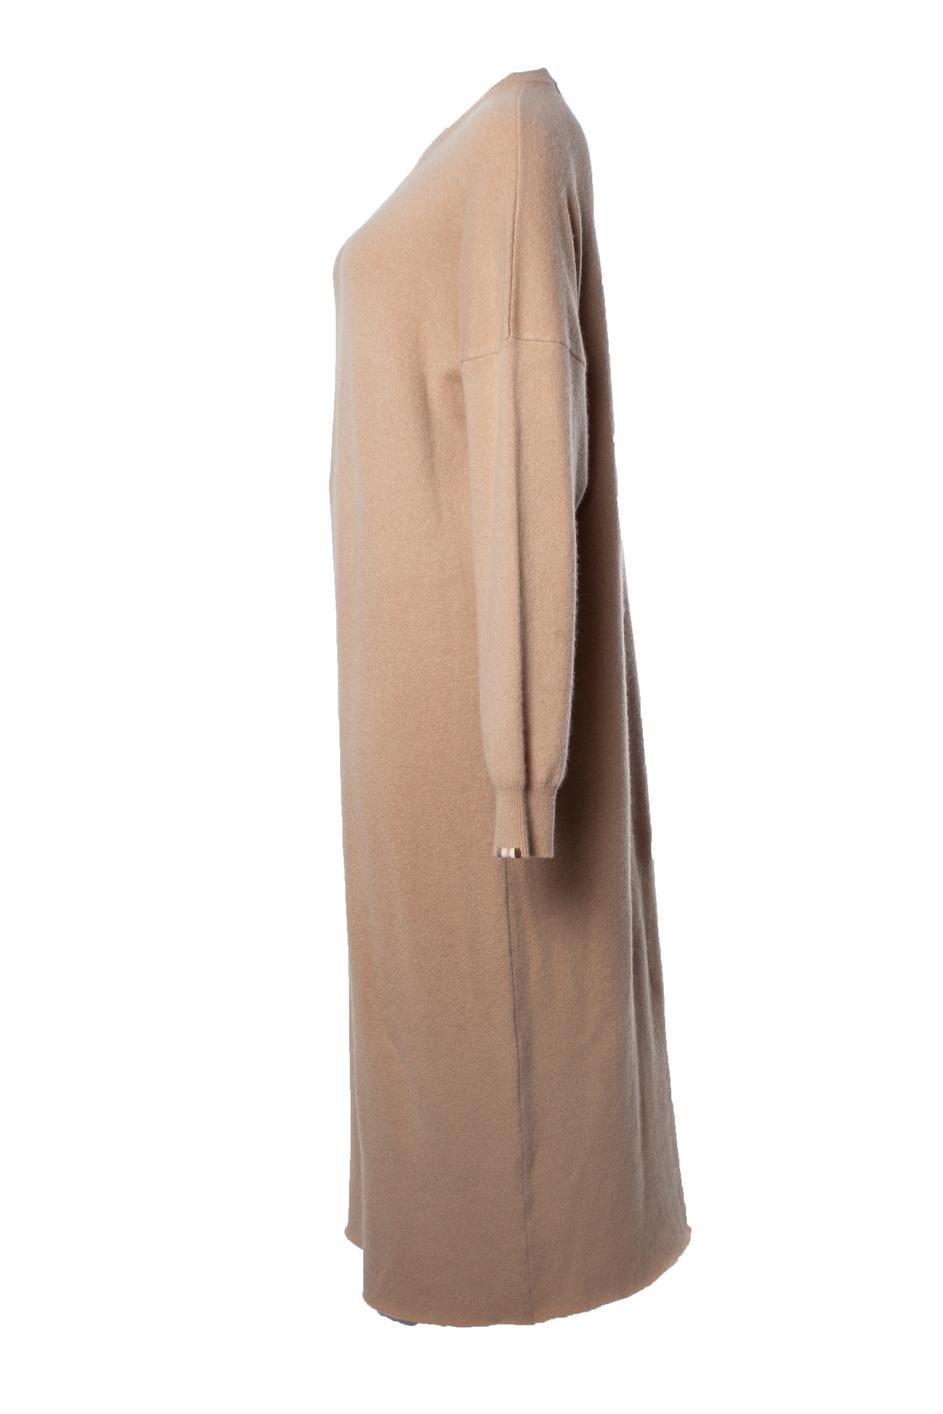 Women's extreme cashmere, maxi sweater dress in camel For Sale